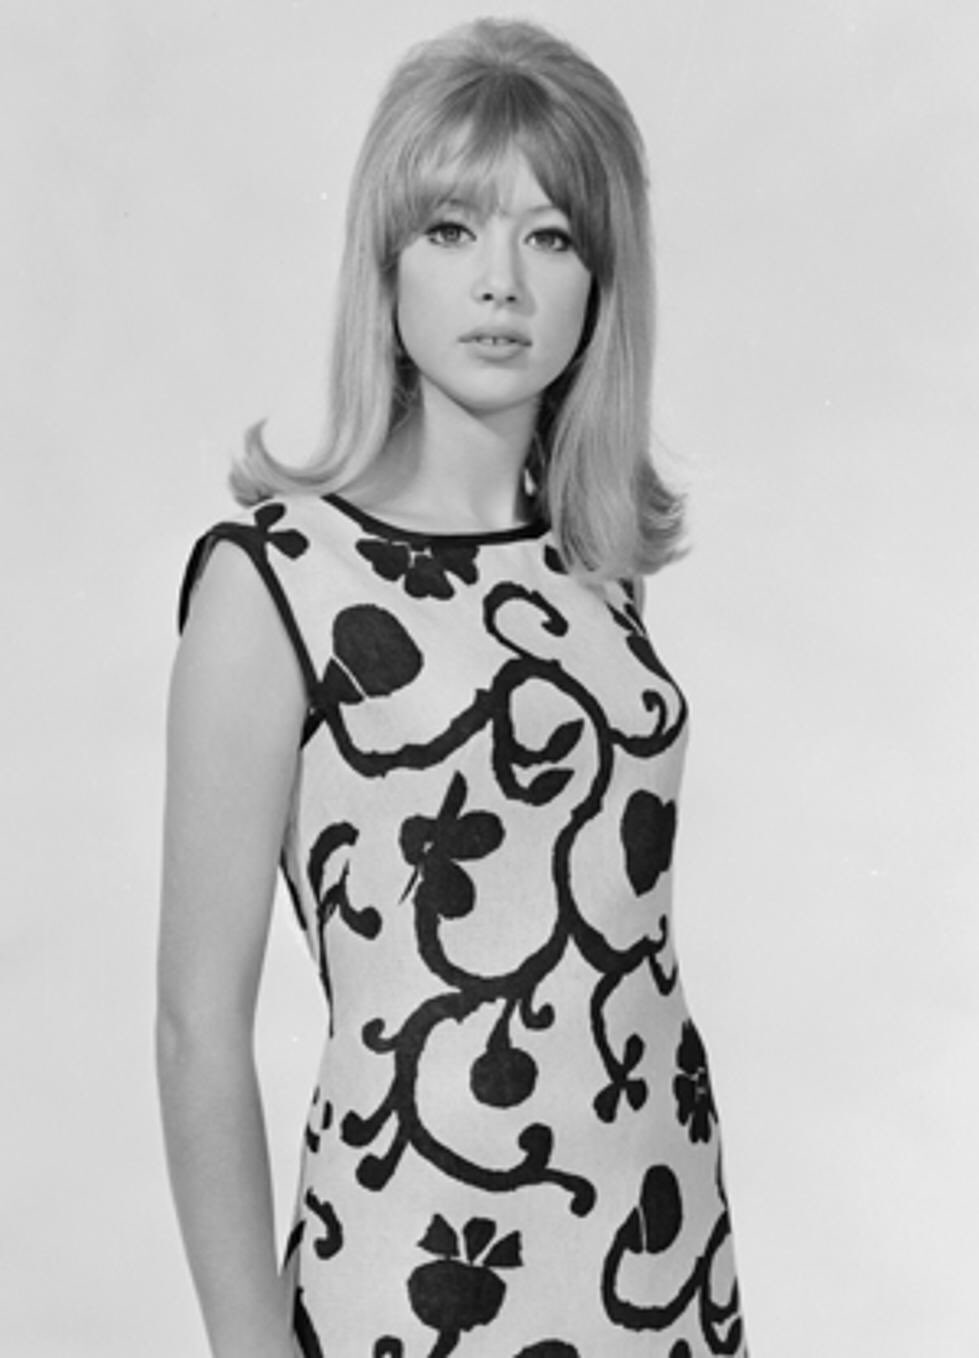 Happy birthday to the one and only pattie boyd  